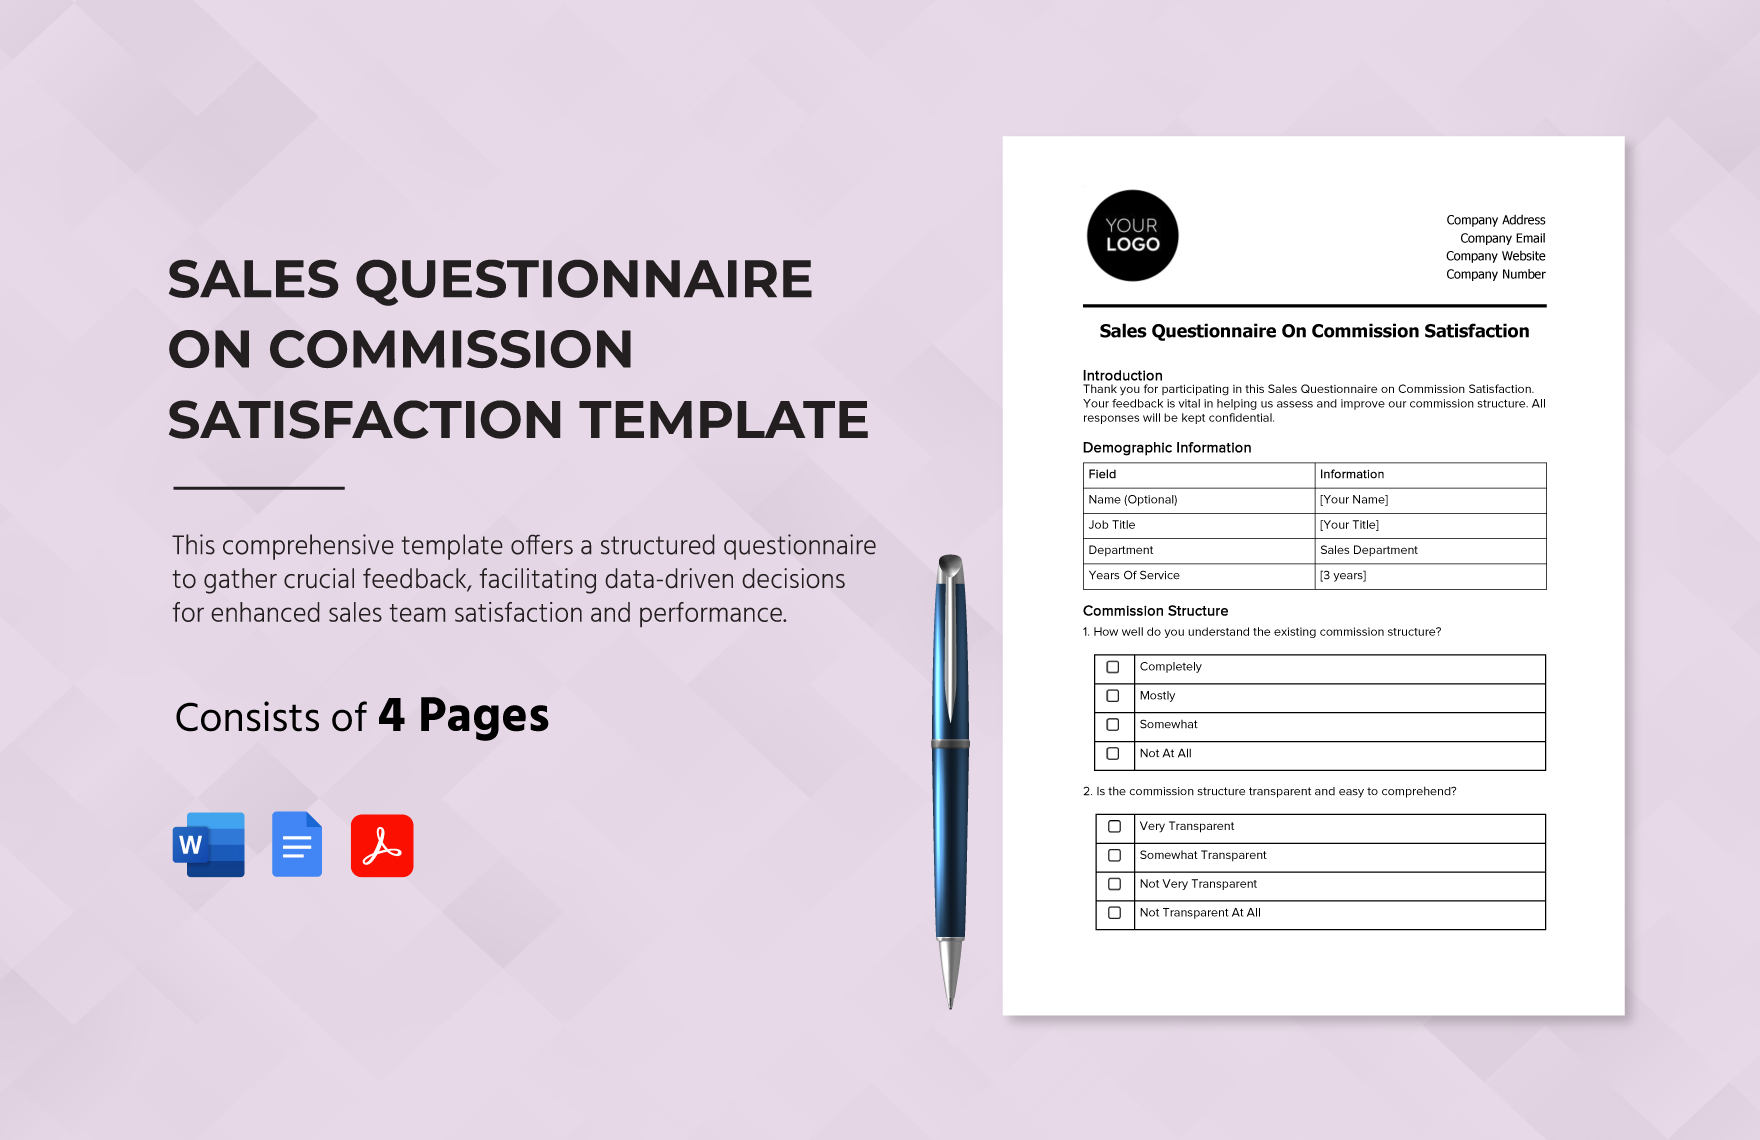 Sales Questionnaire on Commission Satisfaction Template in Word, Google Docs, PDF